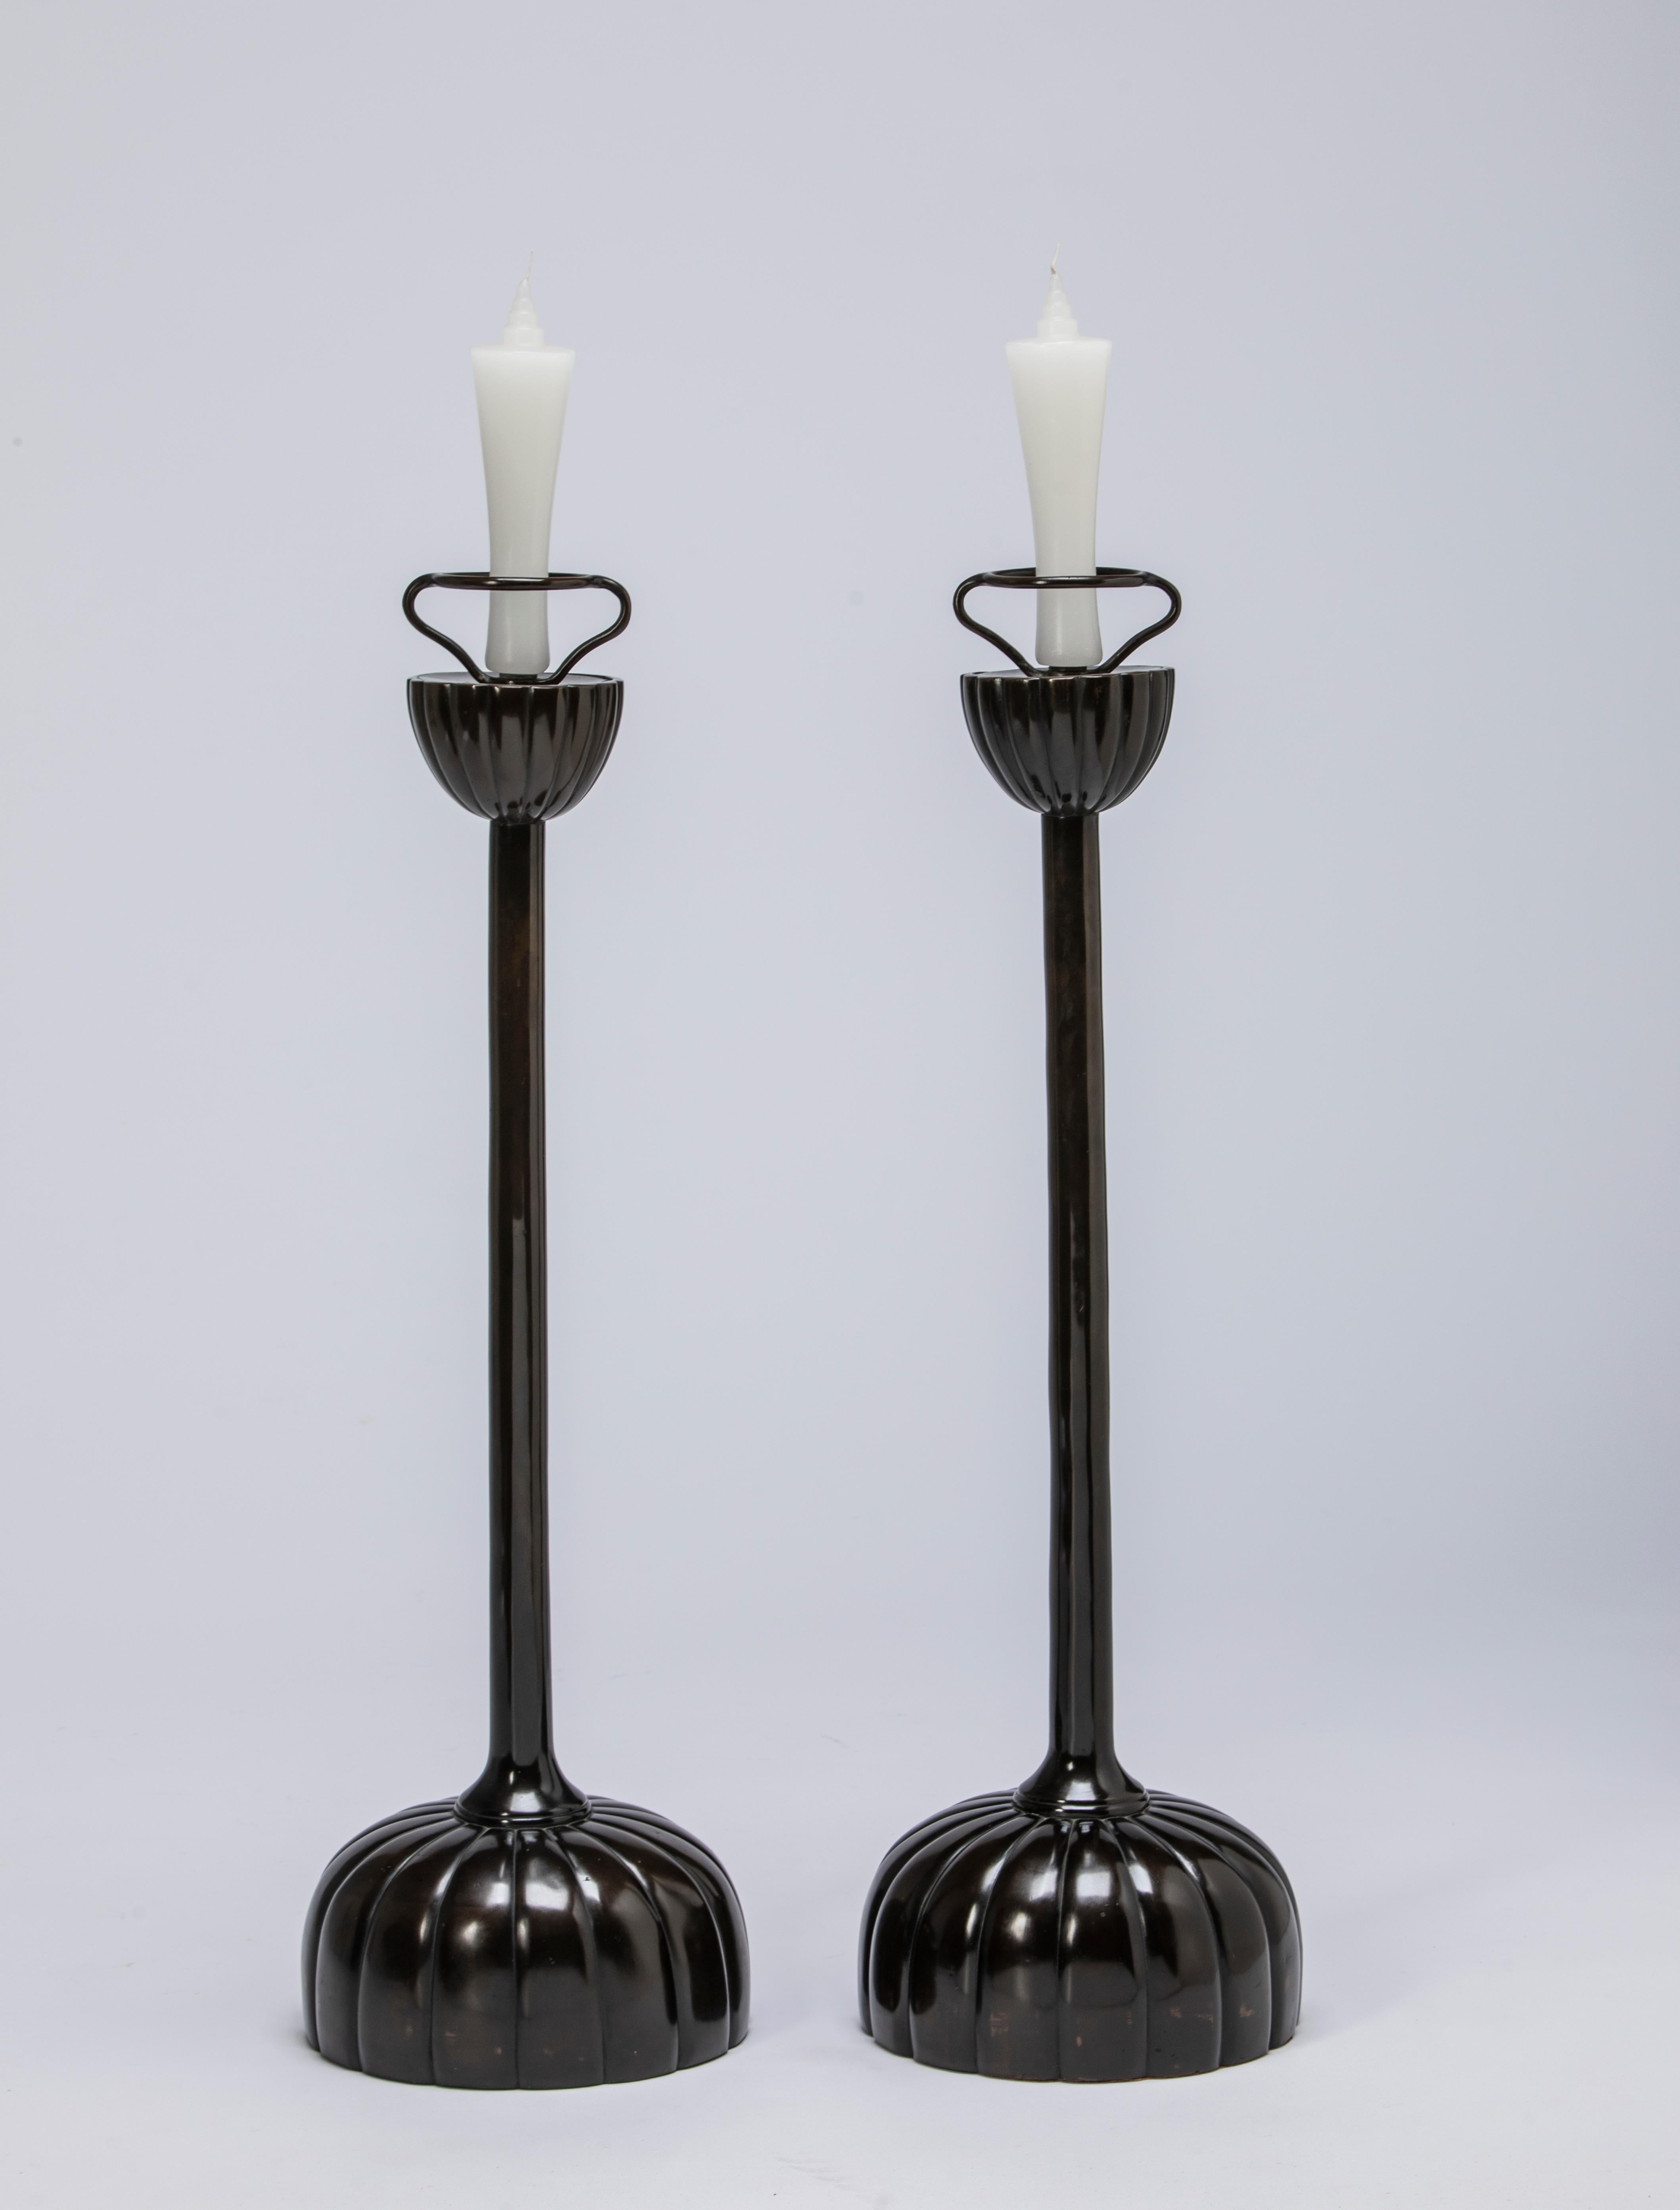 Pair Japanese Bronze/Black-Lacquer Candlesticks

Japanese Bronze/Black-Lacquer Candlesticks
Sold as Pair Only.
Japanese Shokudai
Chrysanthemum Base and Holder
Dimensions : without candles 30